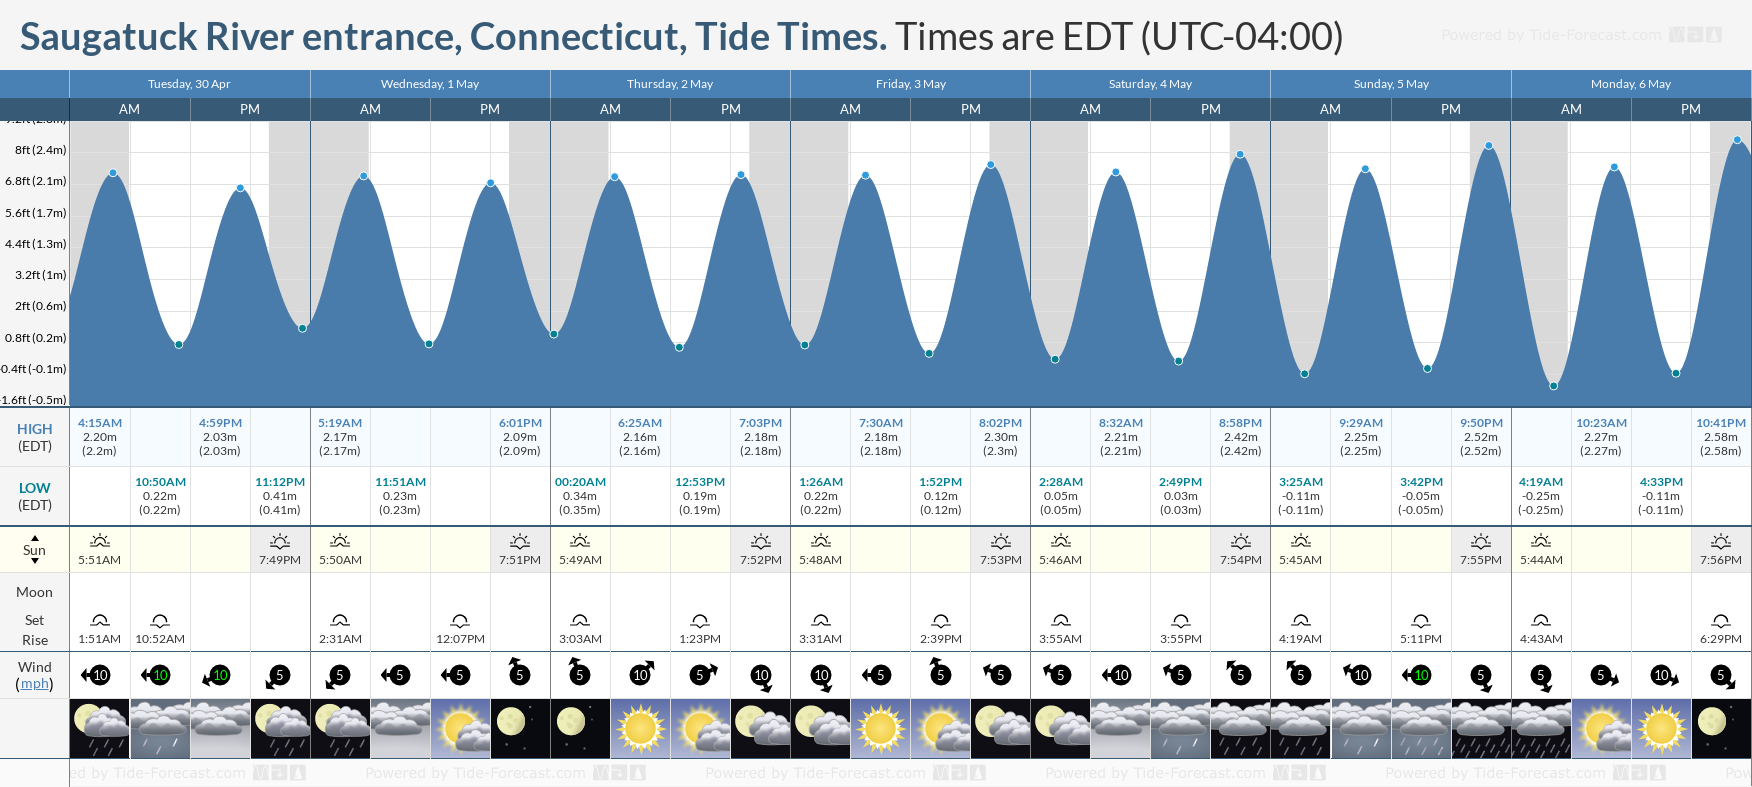 Saugatuck River entrance, Connecticut Tide Chart including high and low tide tide times for the next 7 days